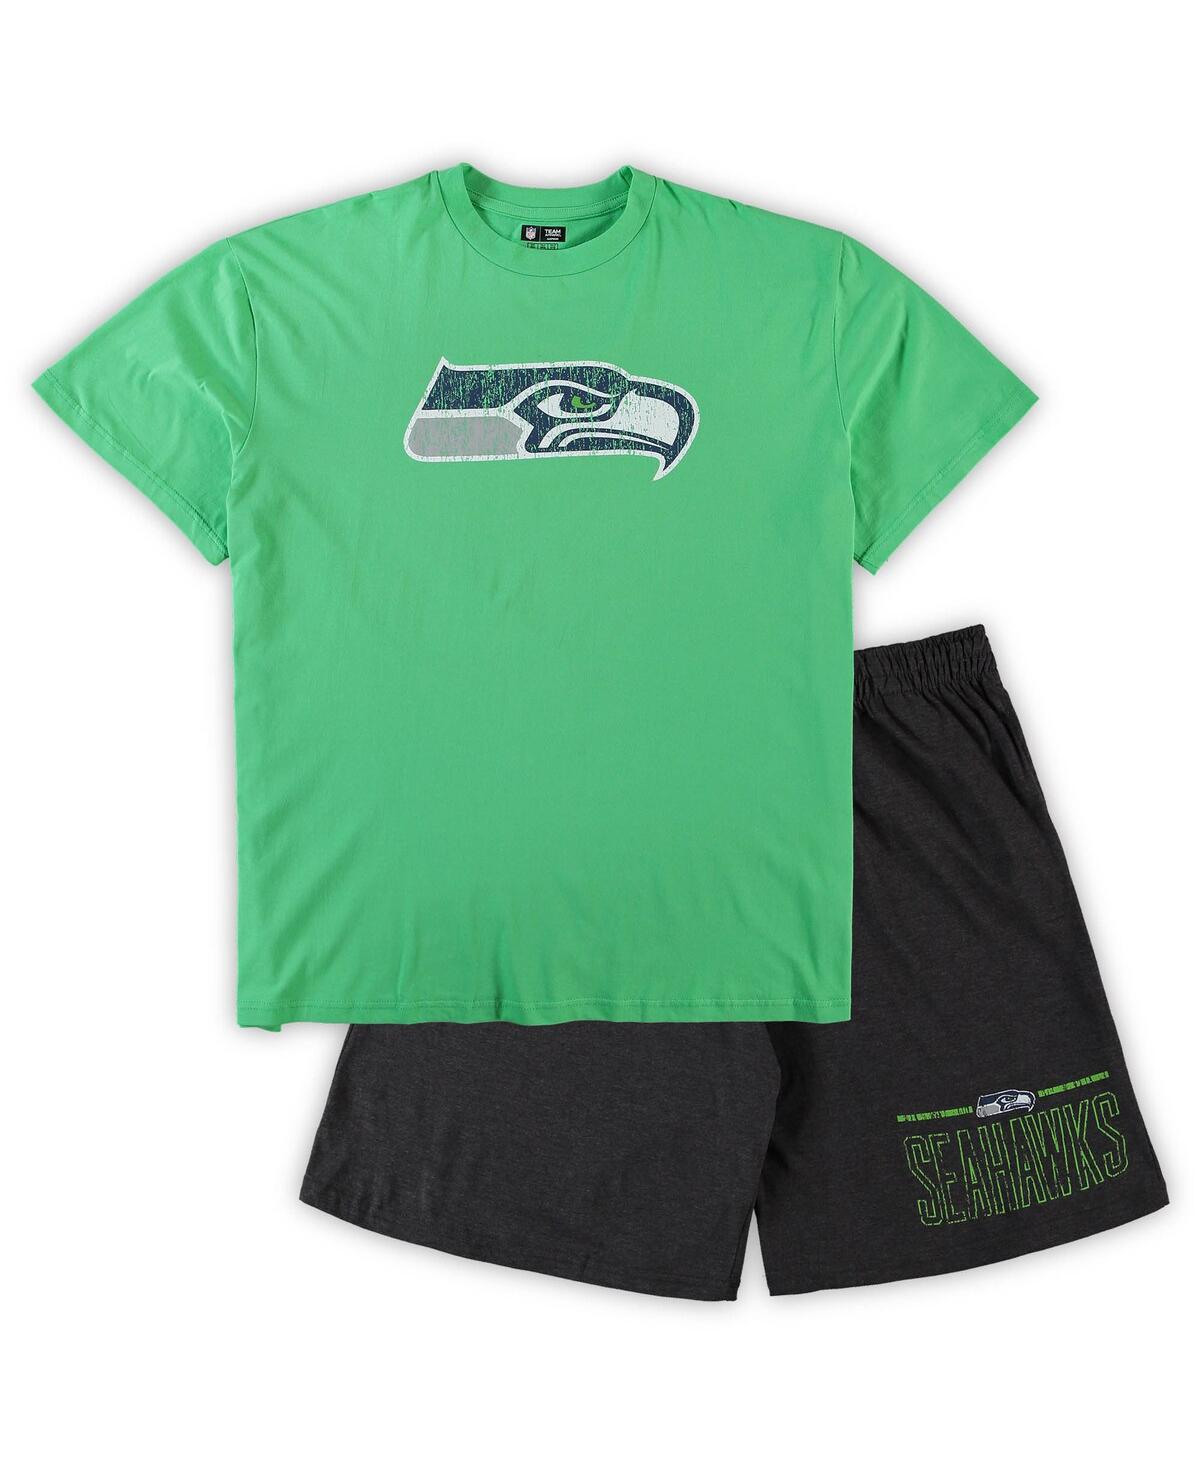 Men's Concepts Sport Neon Green, Heathered Charcoal Seattle Seahawks Big and Tall T-shirt and Shorts Set - Neon Green, Heathered Charcoal